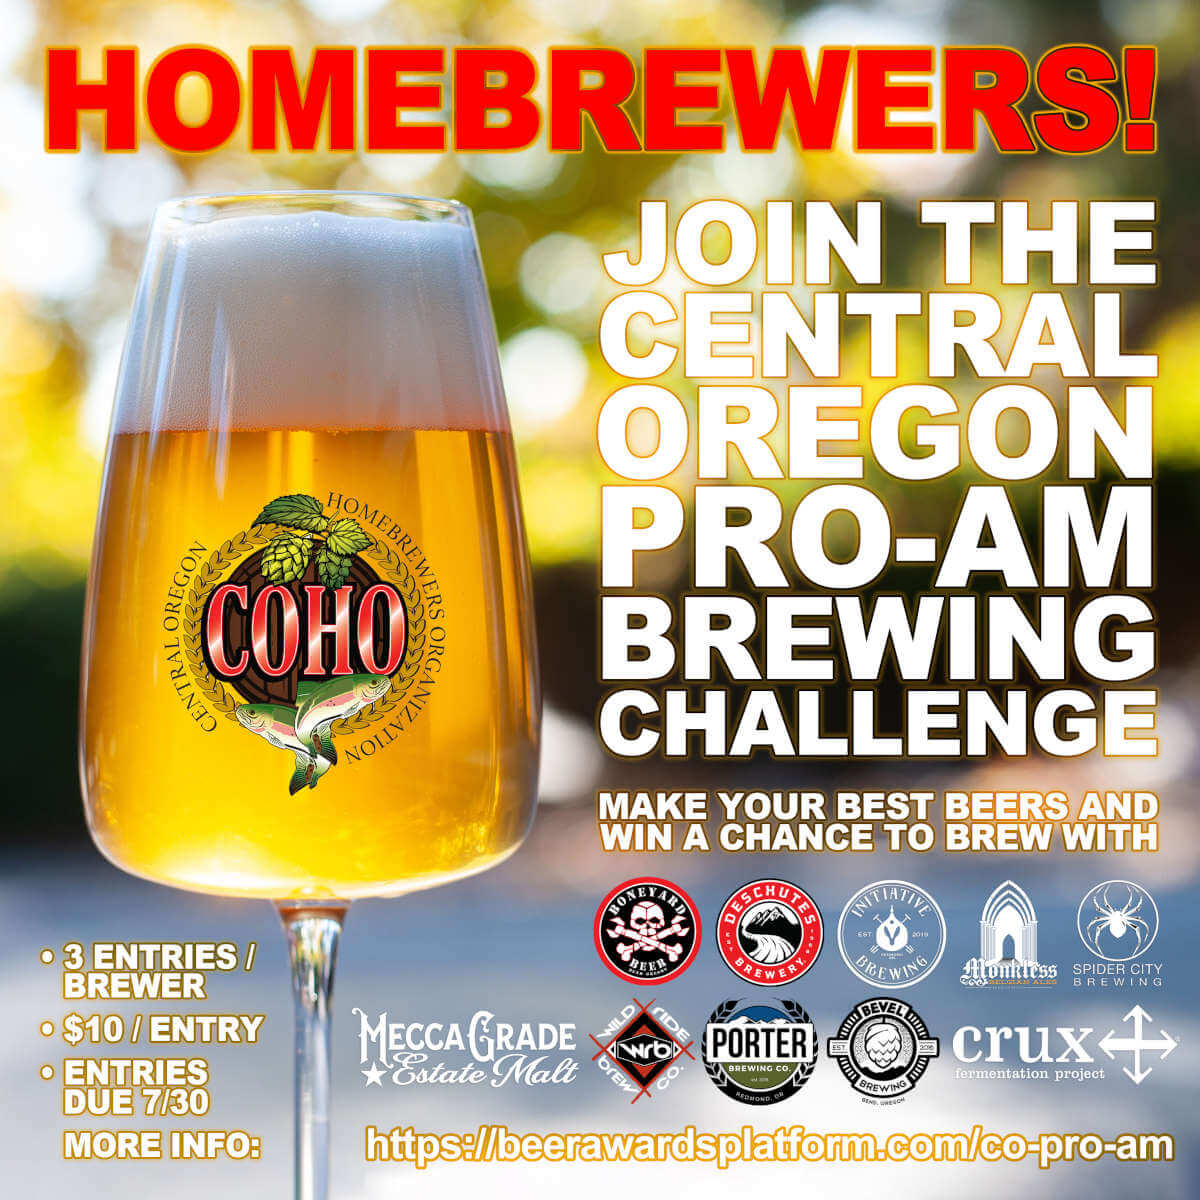 Homebrewers – enter the 2022 Central Oregon Pro-Am Brewing Challenge